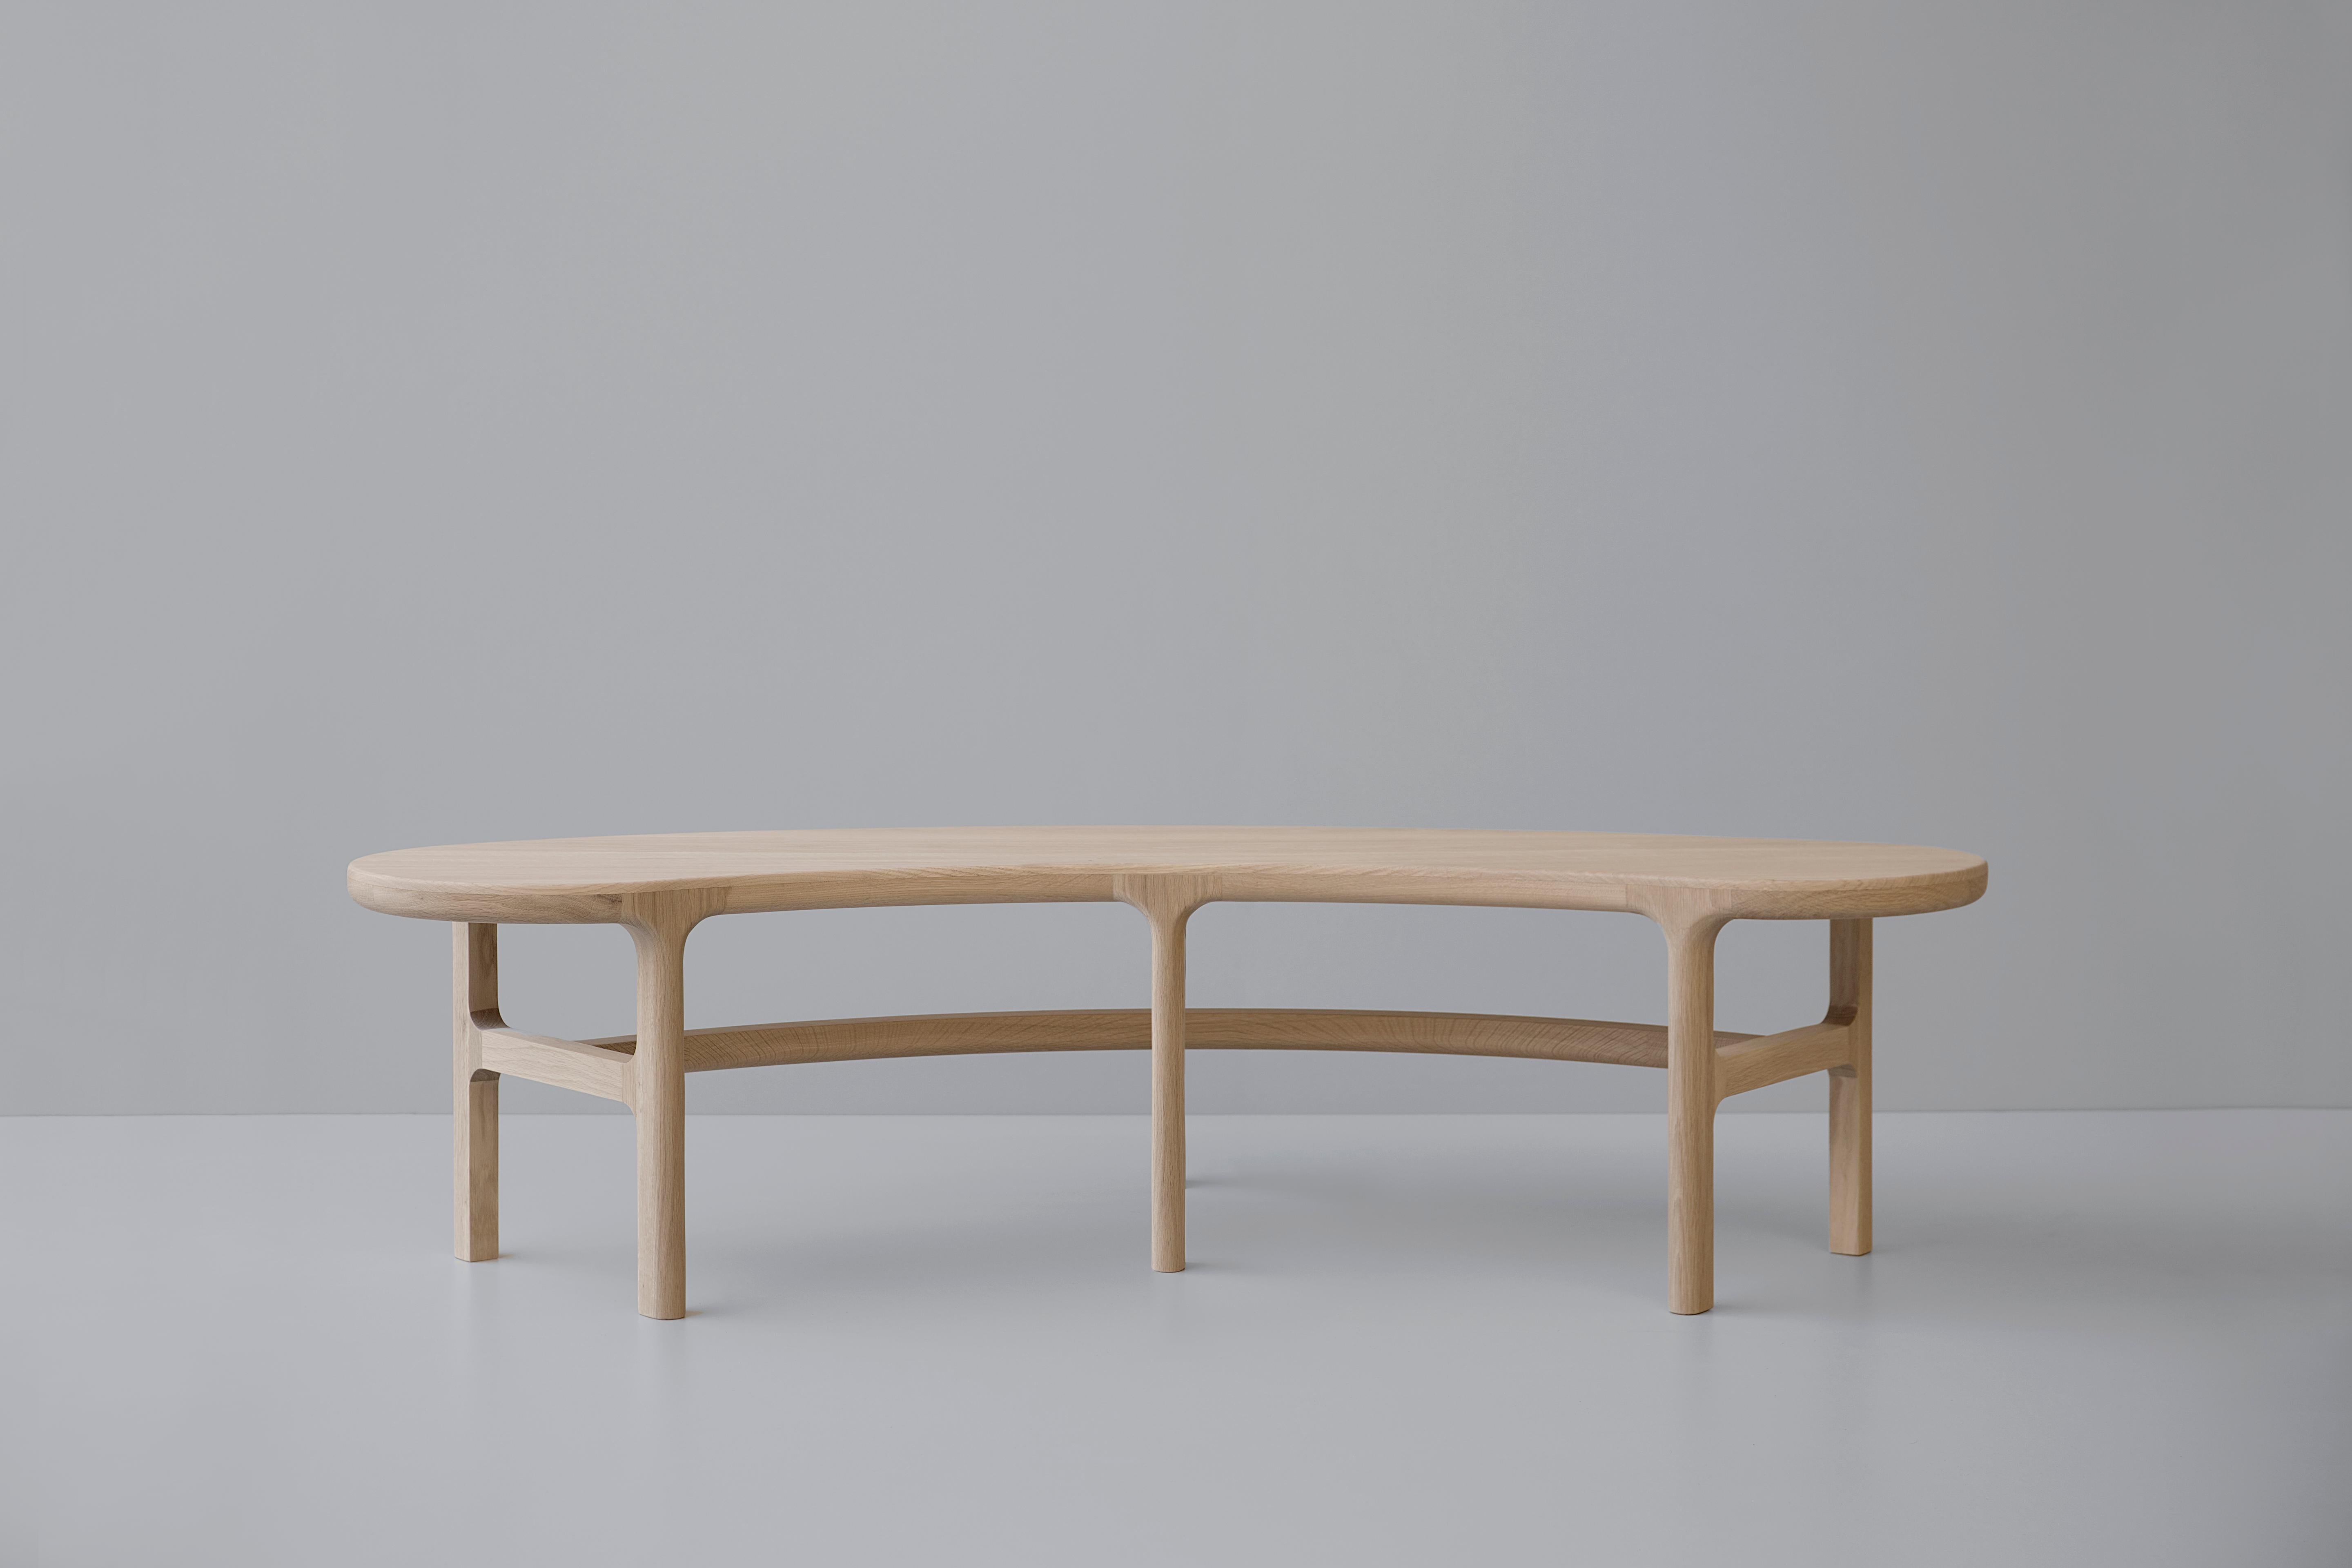 Trasiego bench by Arturo Verástegui
Dimensions: D 160 x W 60 x H 42 cm
Materials: oak wood.

Natural white oak bench.

Sebastián Angeles is an Industrial Designer originally from Mexico City who graduated from the Anáhuac Mexico University in